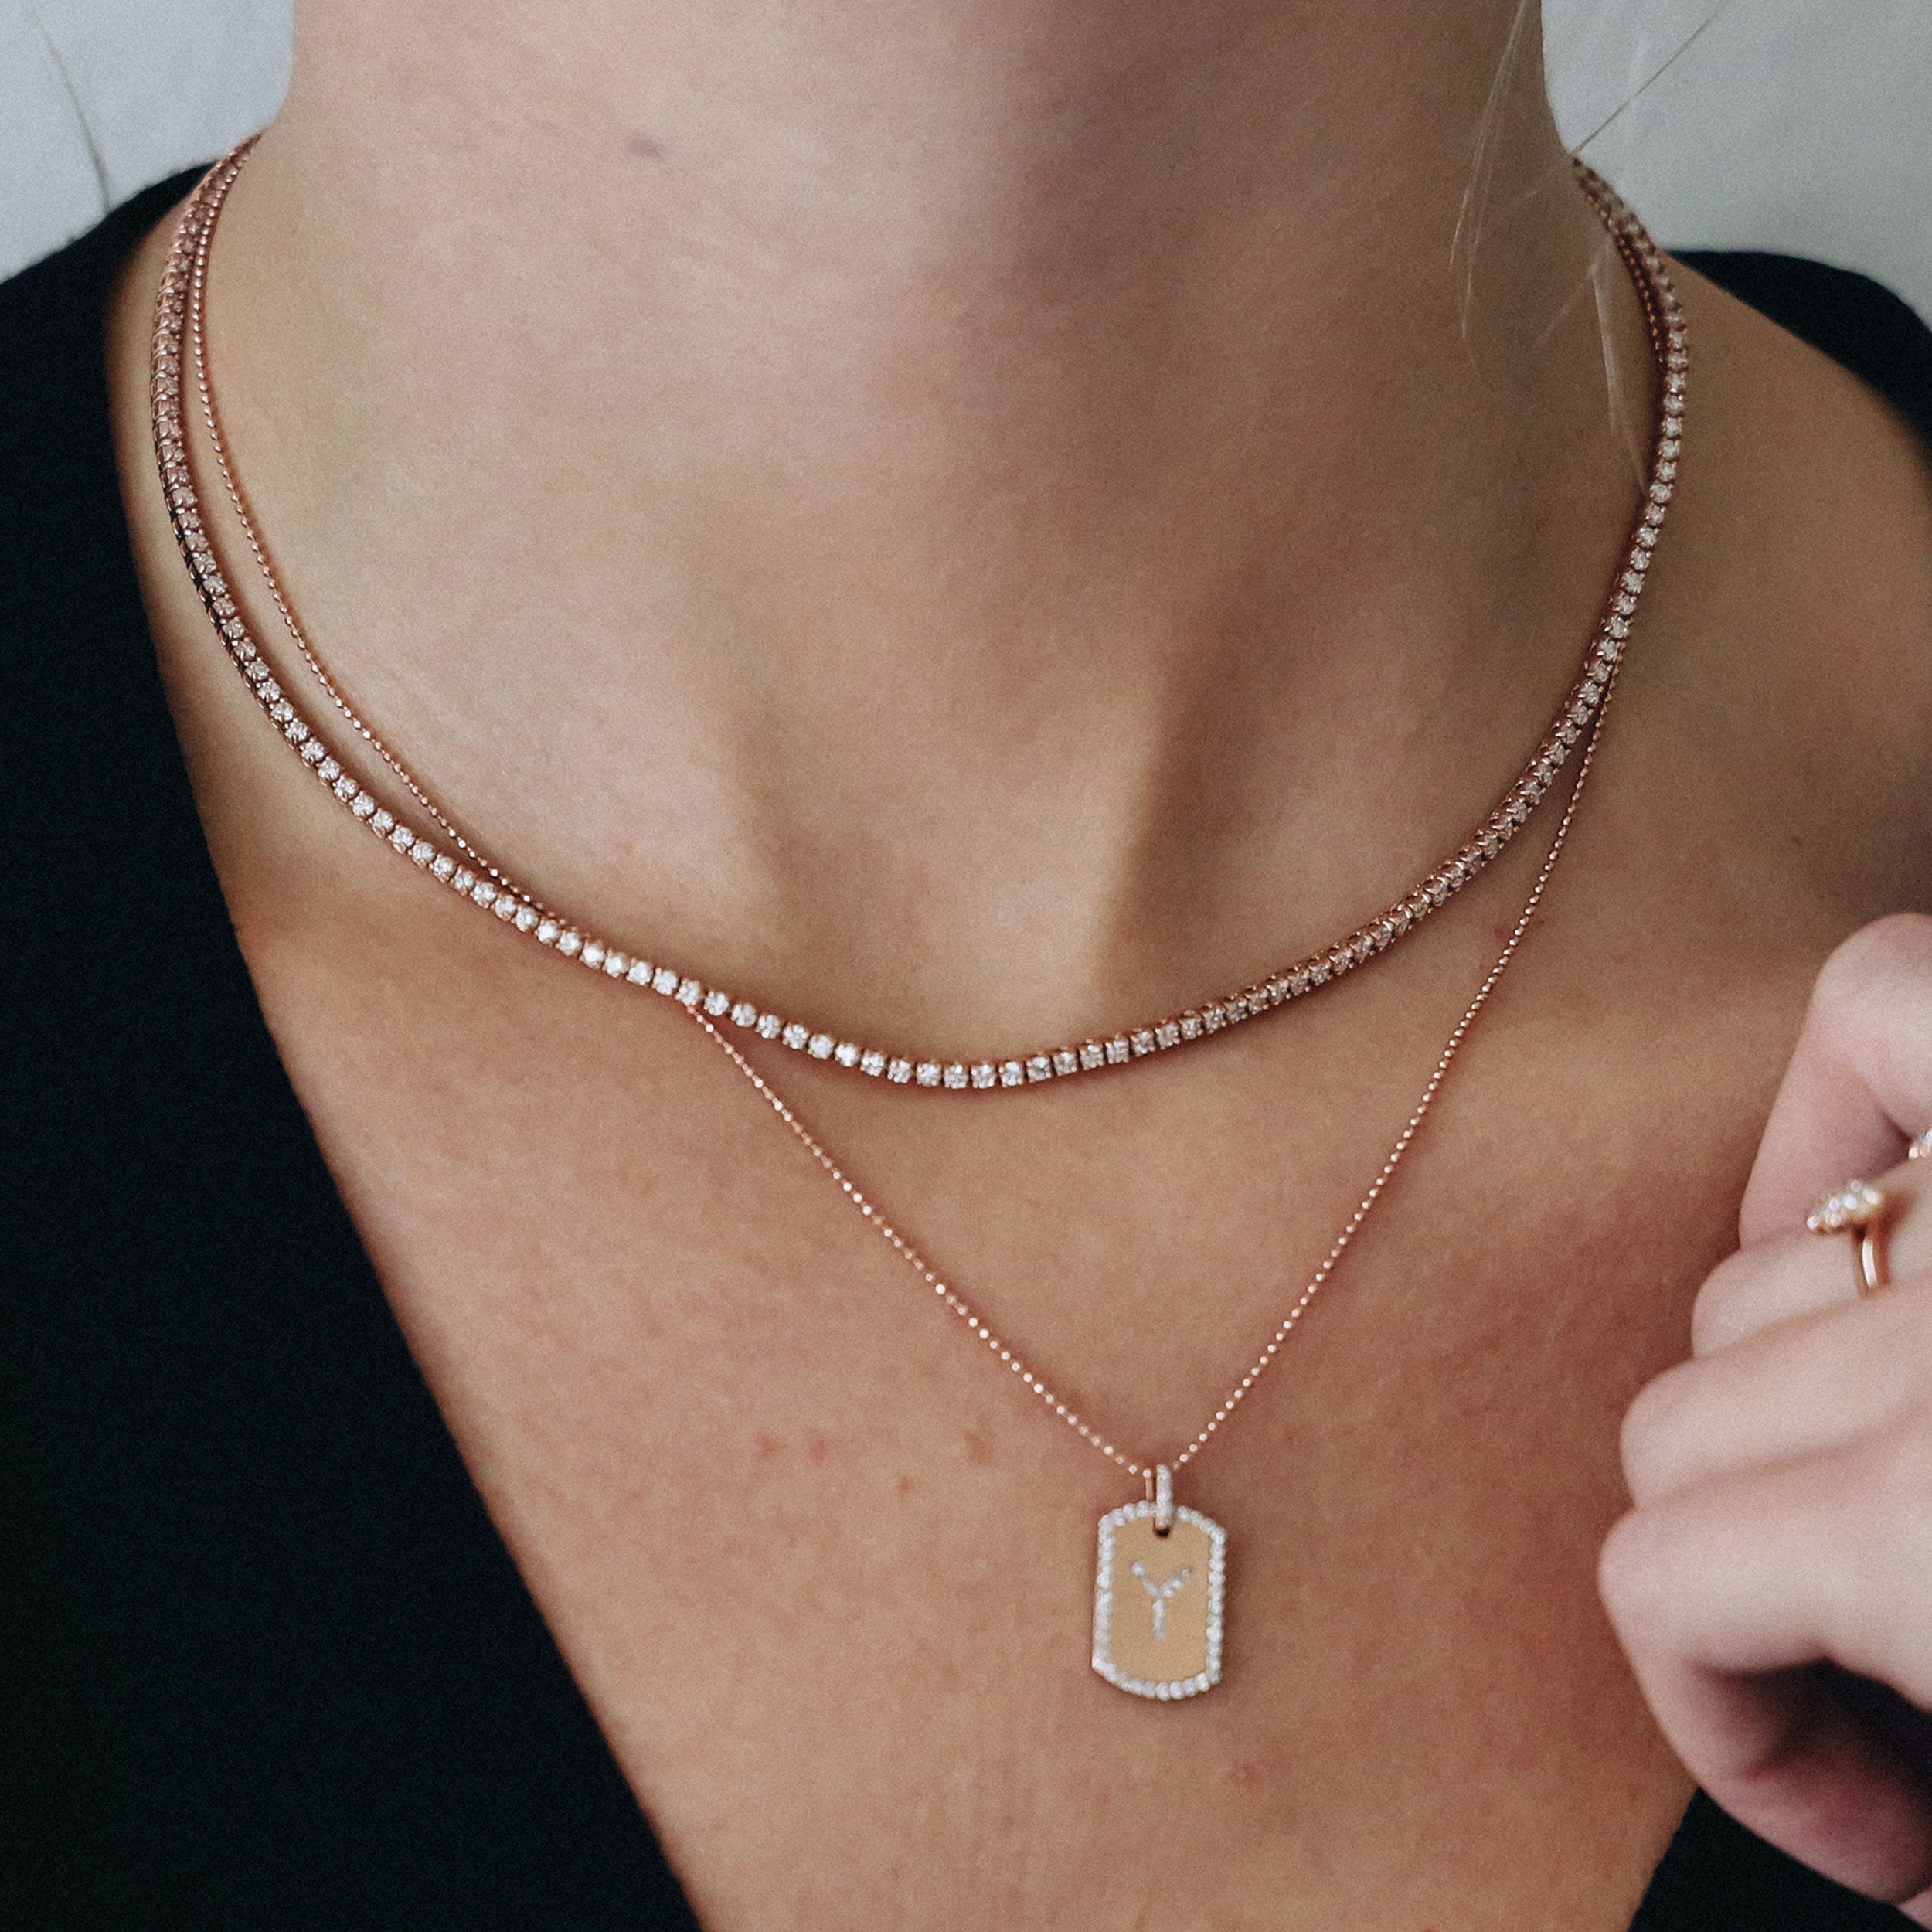 5.25 Carat Tennis Necklace shown alongside the Initial Dogtag in rose gold.